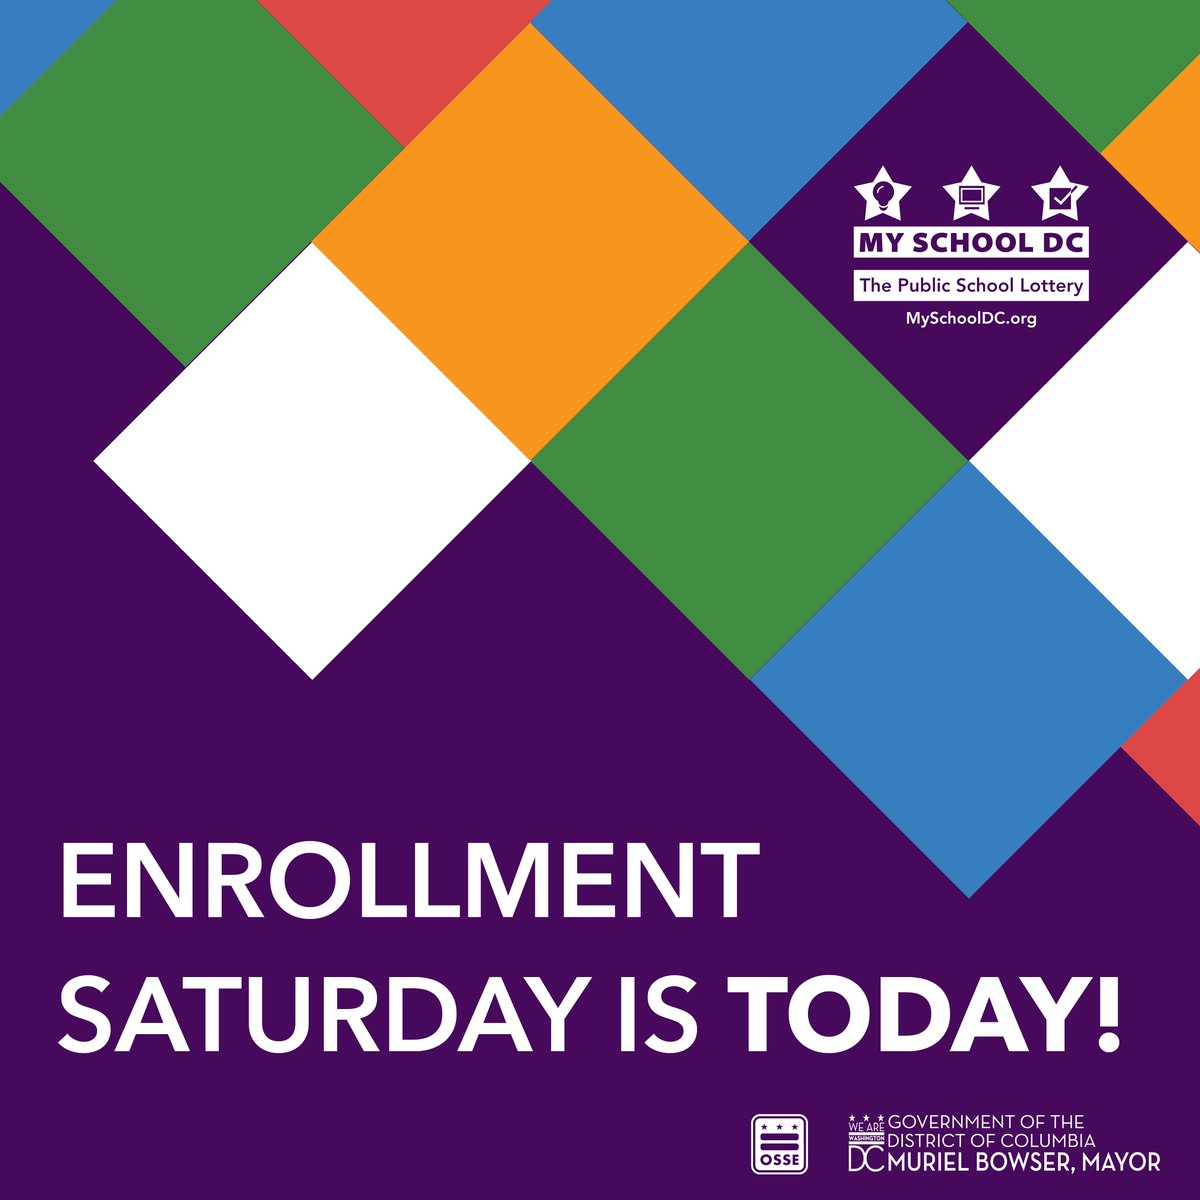 Enrollment Saturday is TODAY! From 9:00 a.m. to 12:00 p.m. you can enroll or re-enroll your student in person at their school. See the list of participating schools here: buff.ly/40T4ivN